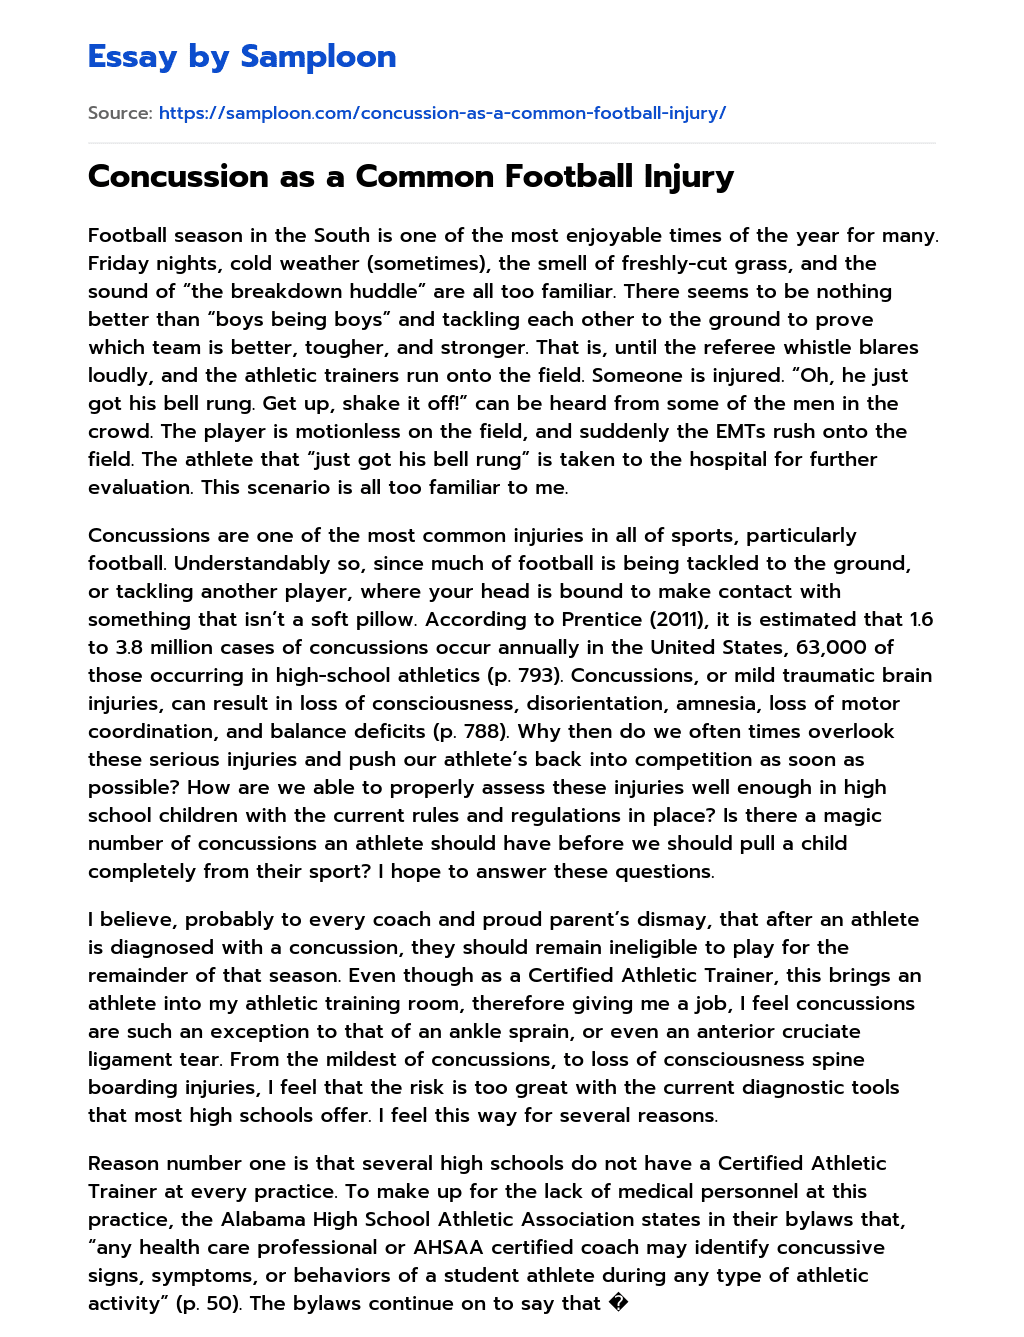 research paper on concussions in football